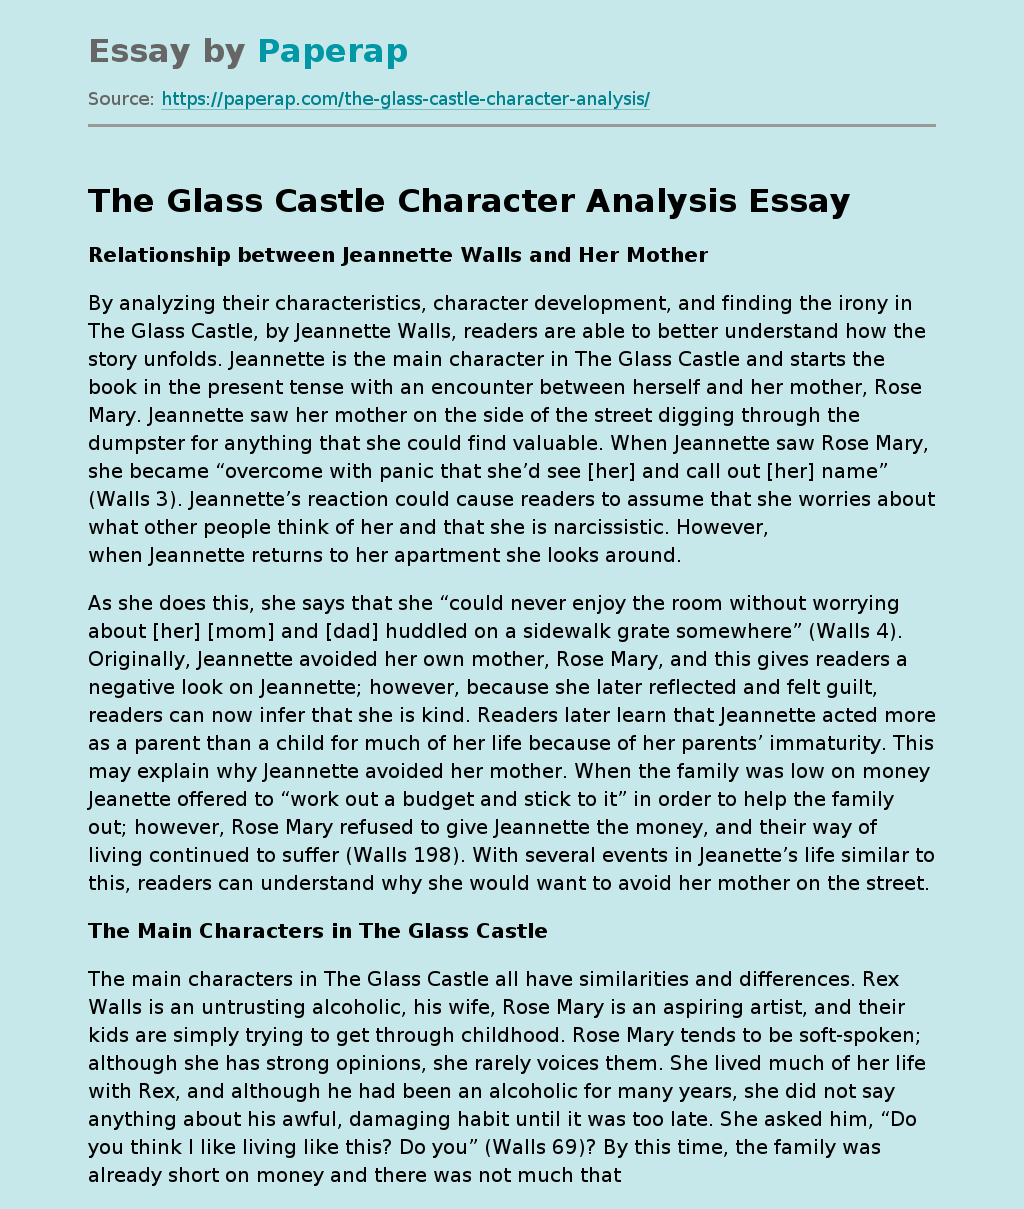 The Glass Castle Character Analysis